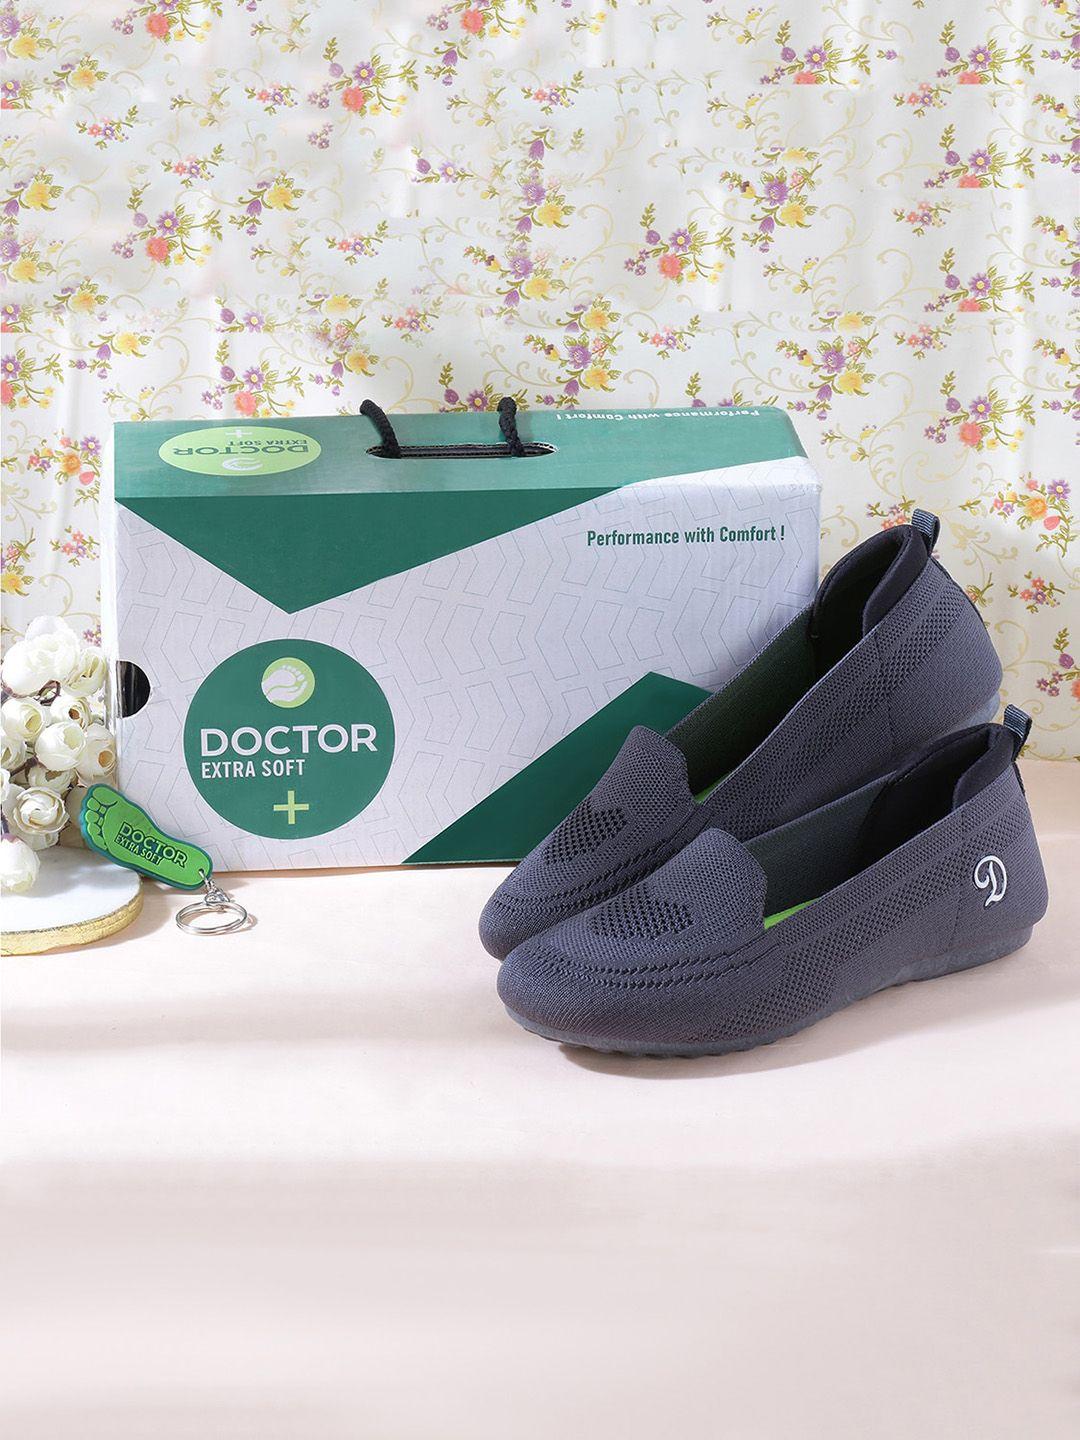 DOCTOR EXTRA SOFT Women Perforations Lightweight Slip-On Sneakers